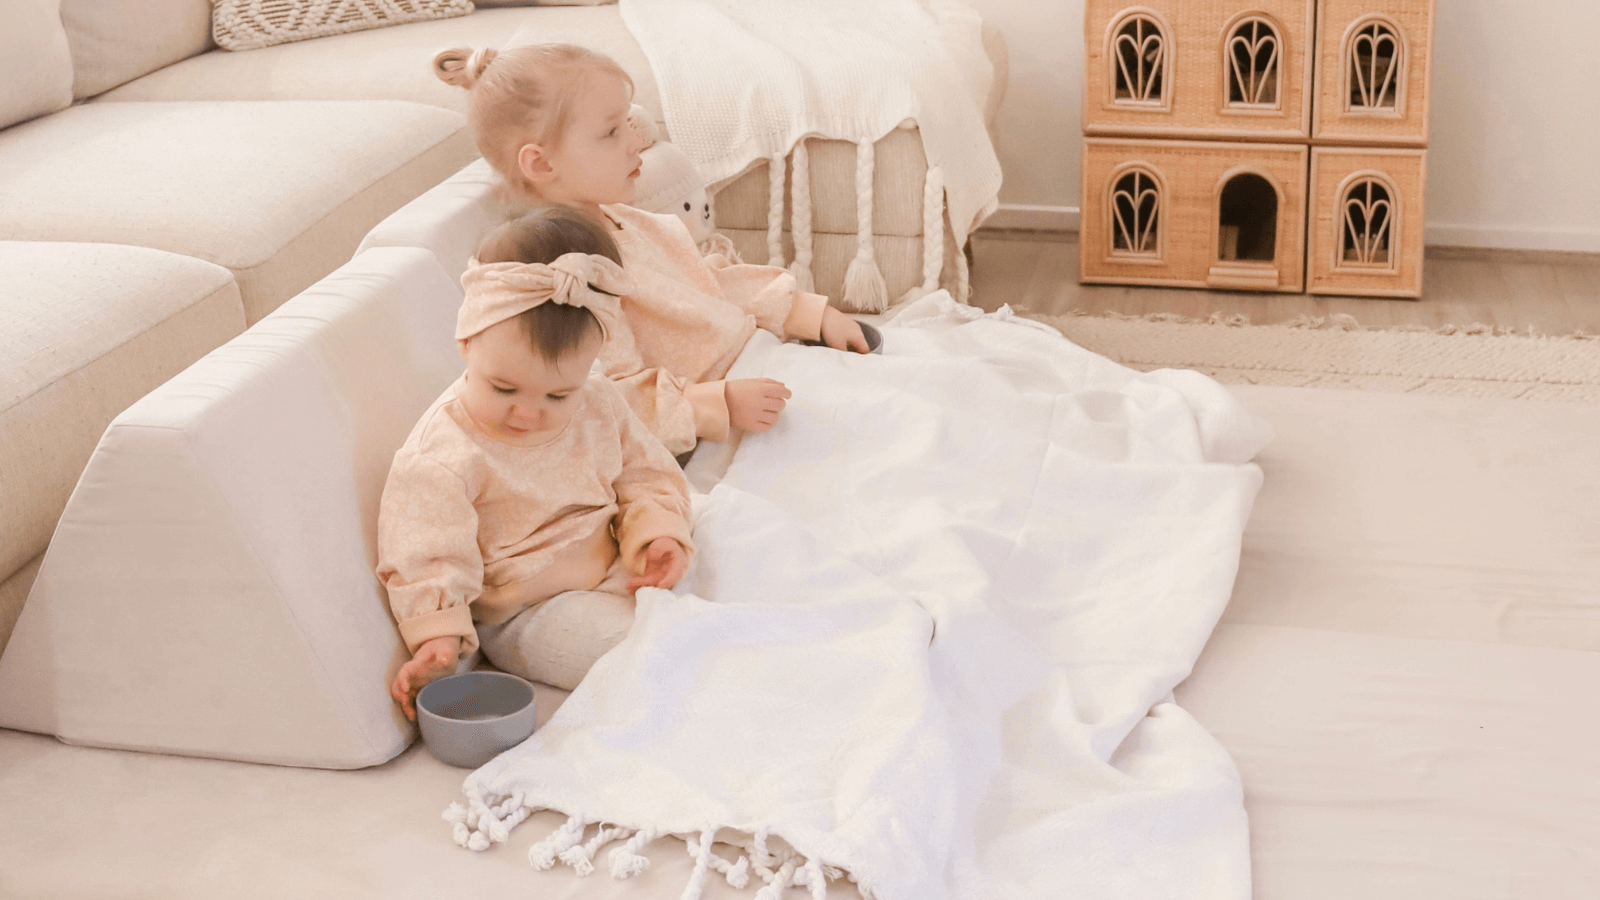 These two love their very own movie theatre made from their Funsquare kids play couch!